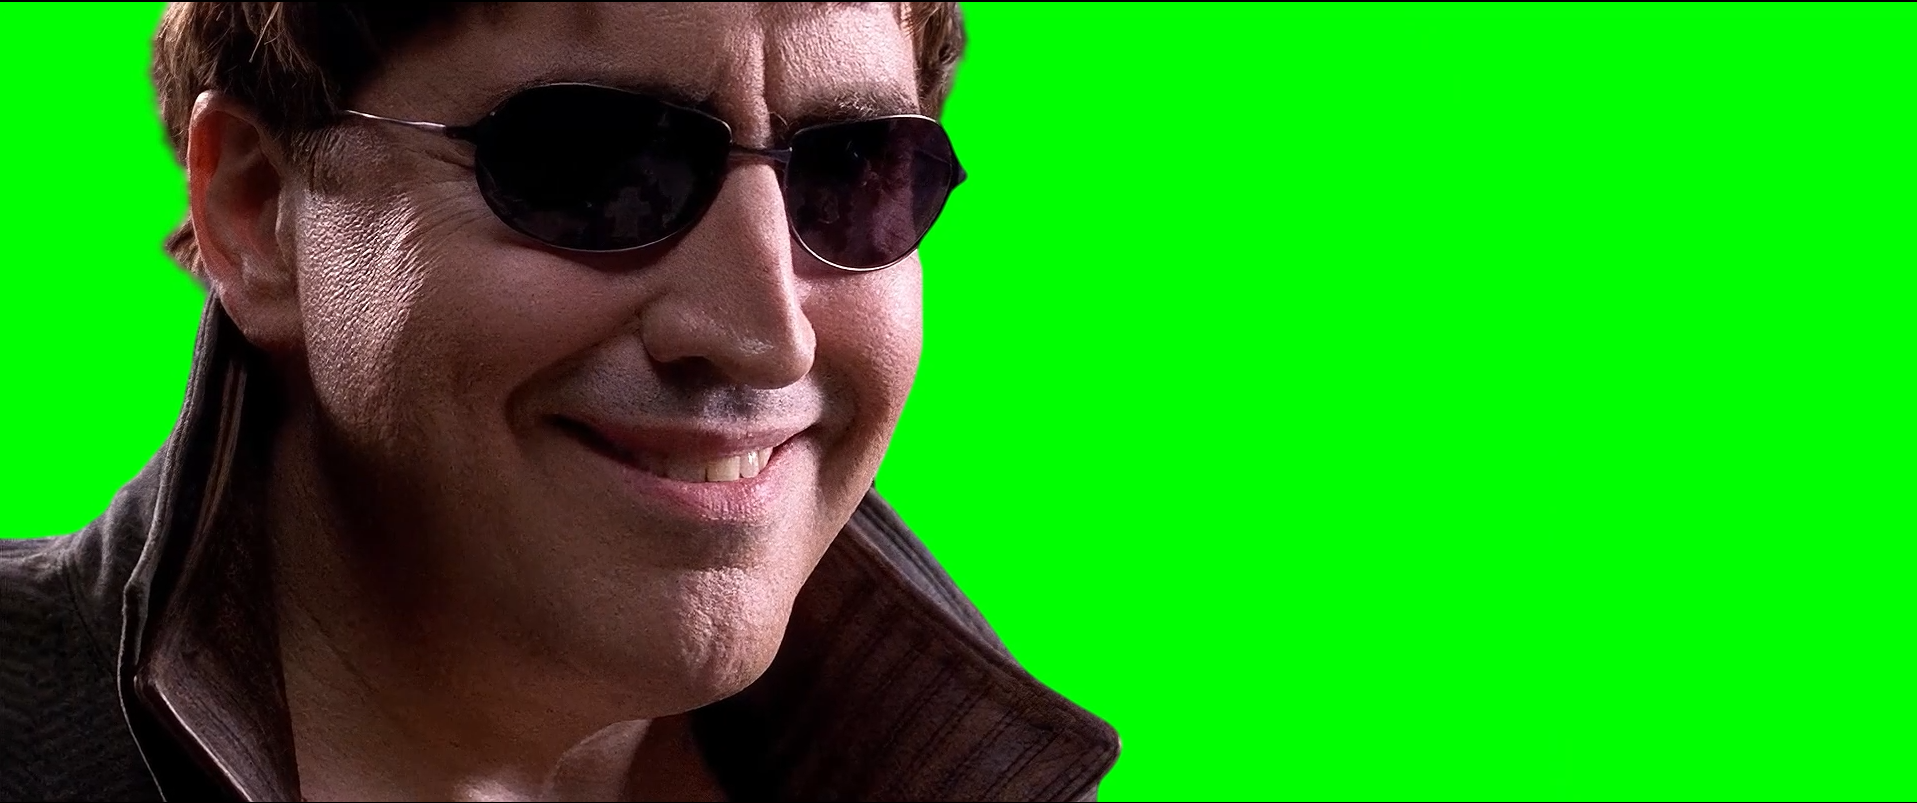 Doctor Octopus Evil Smile to Mary Jane meme - Spider-Man 2 (Green Screen)